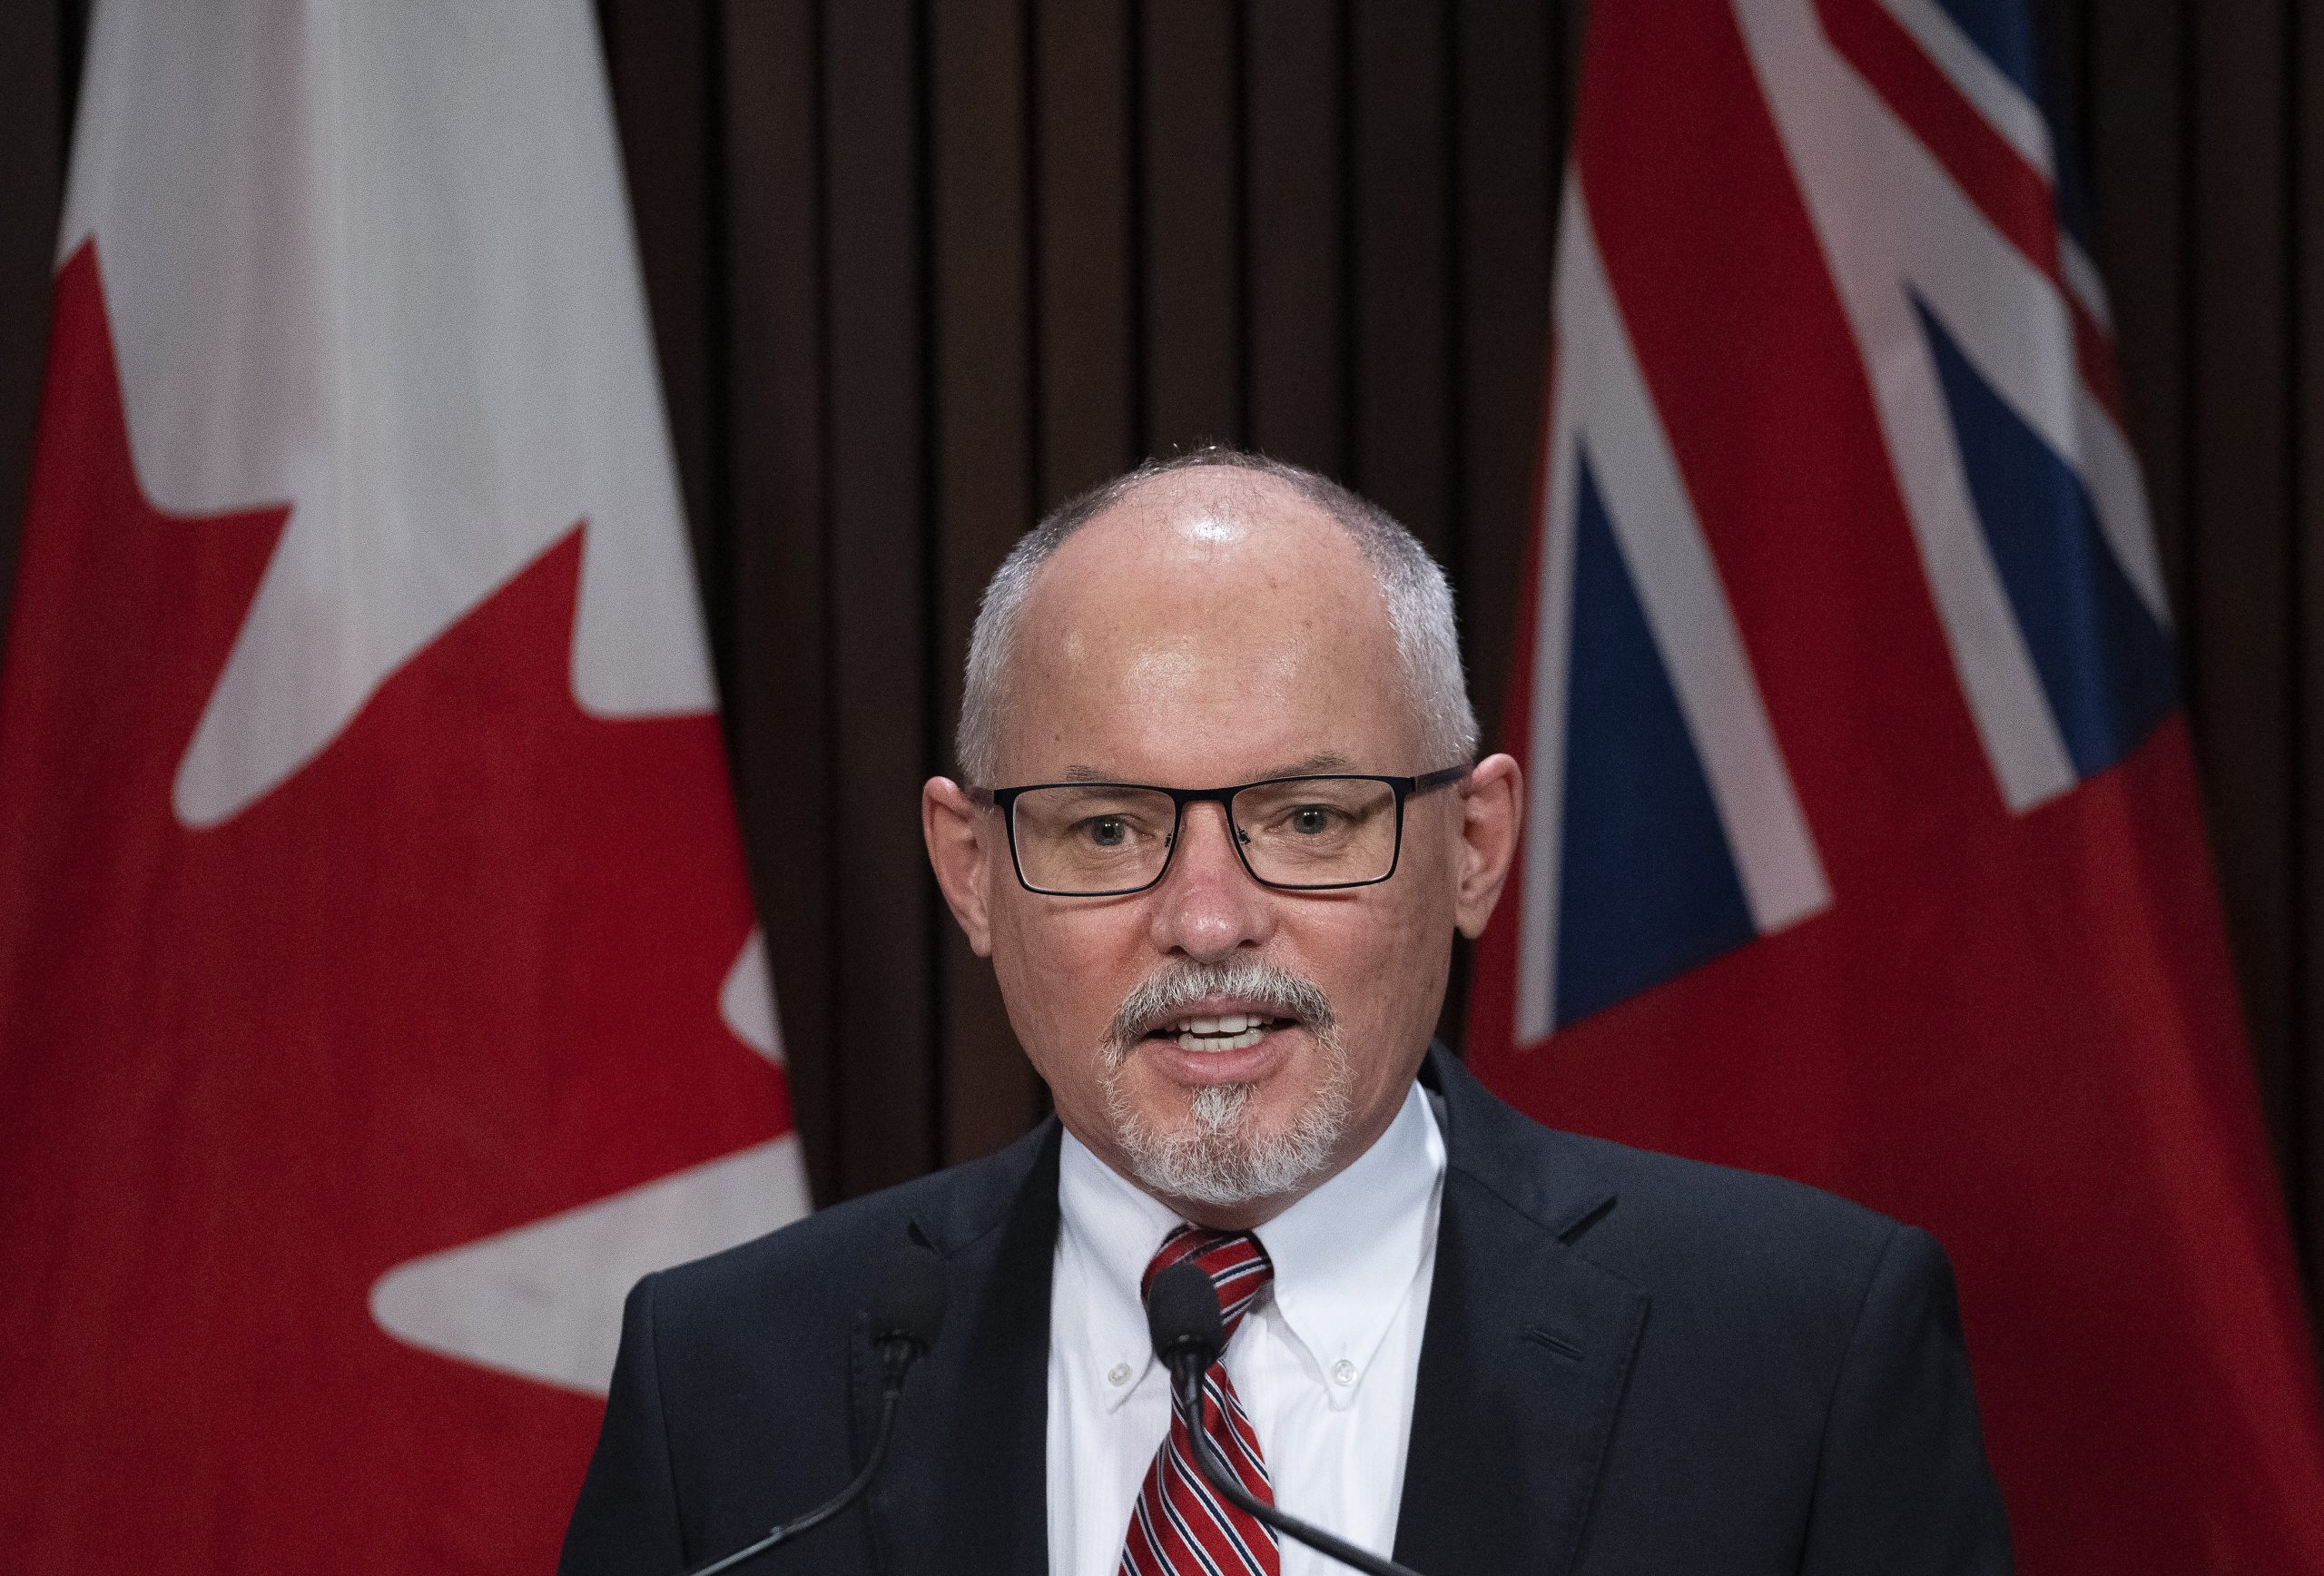 Ontario’s Chief Health Officer Kieran Moore is now saying It’s “therapeutic”. And there’s more…